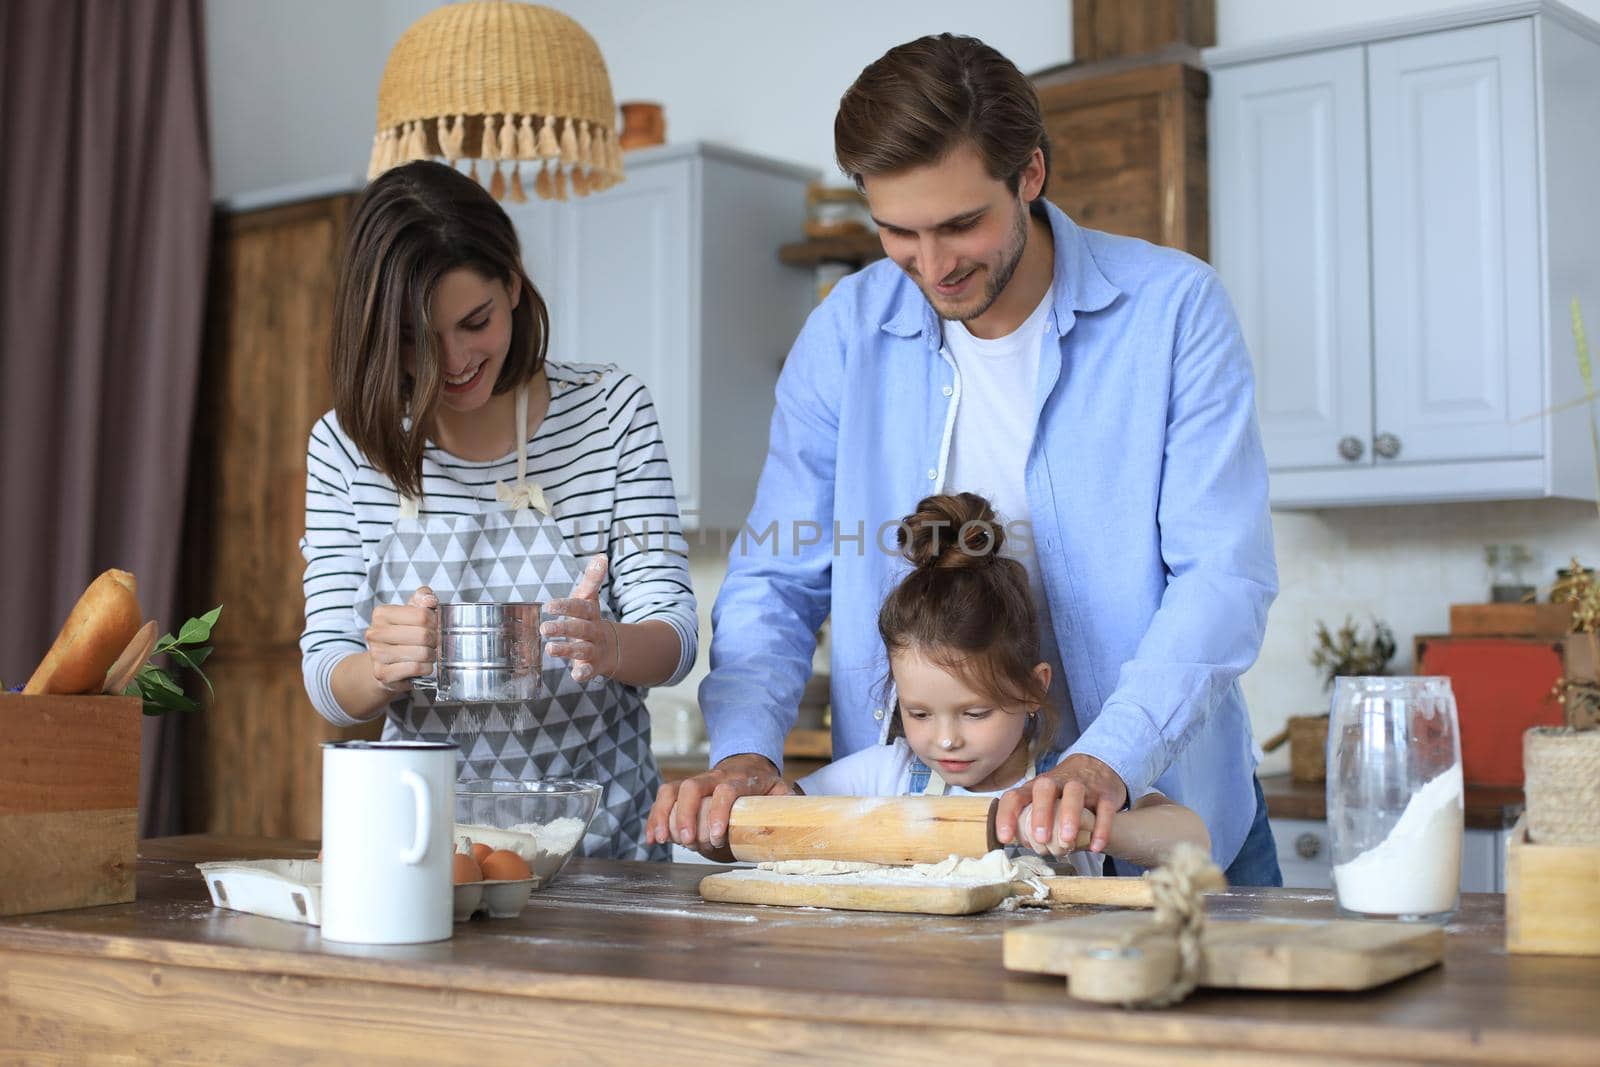 Cute little girl and her parents are having fun while cooking in kitchen at home together